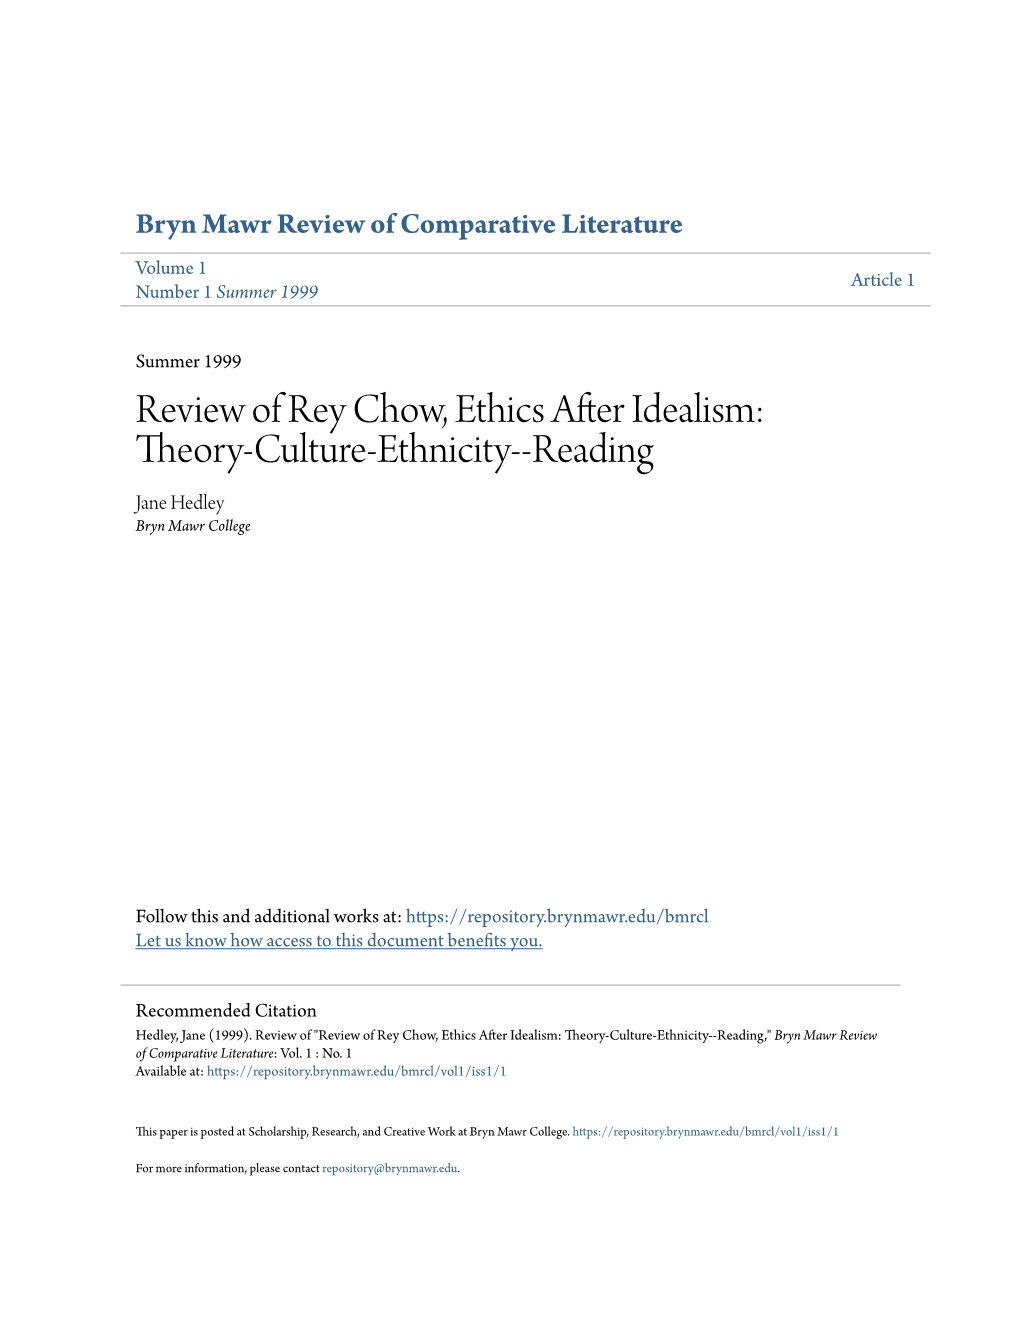 Review of Rey Chow, Ethics After Idealism: Theory-Culture-Ethnicity--Reading Jane Hedley Bryn Mawr College